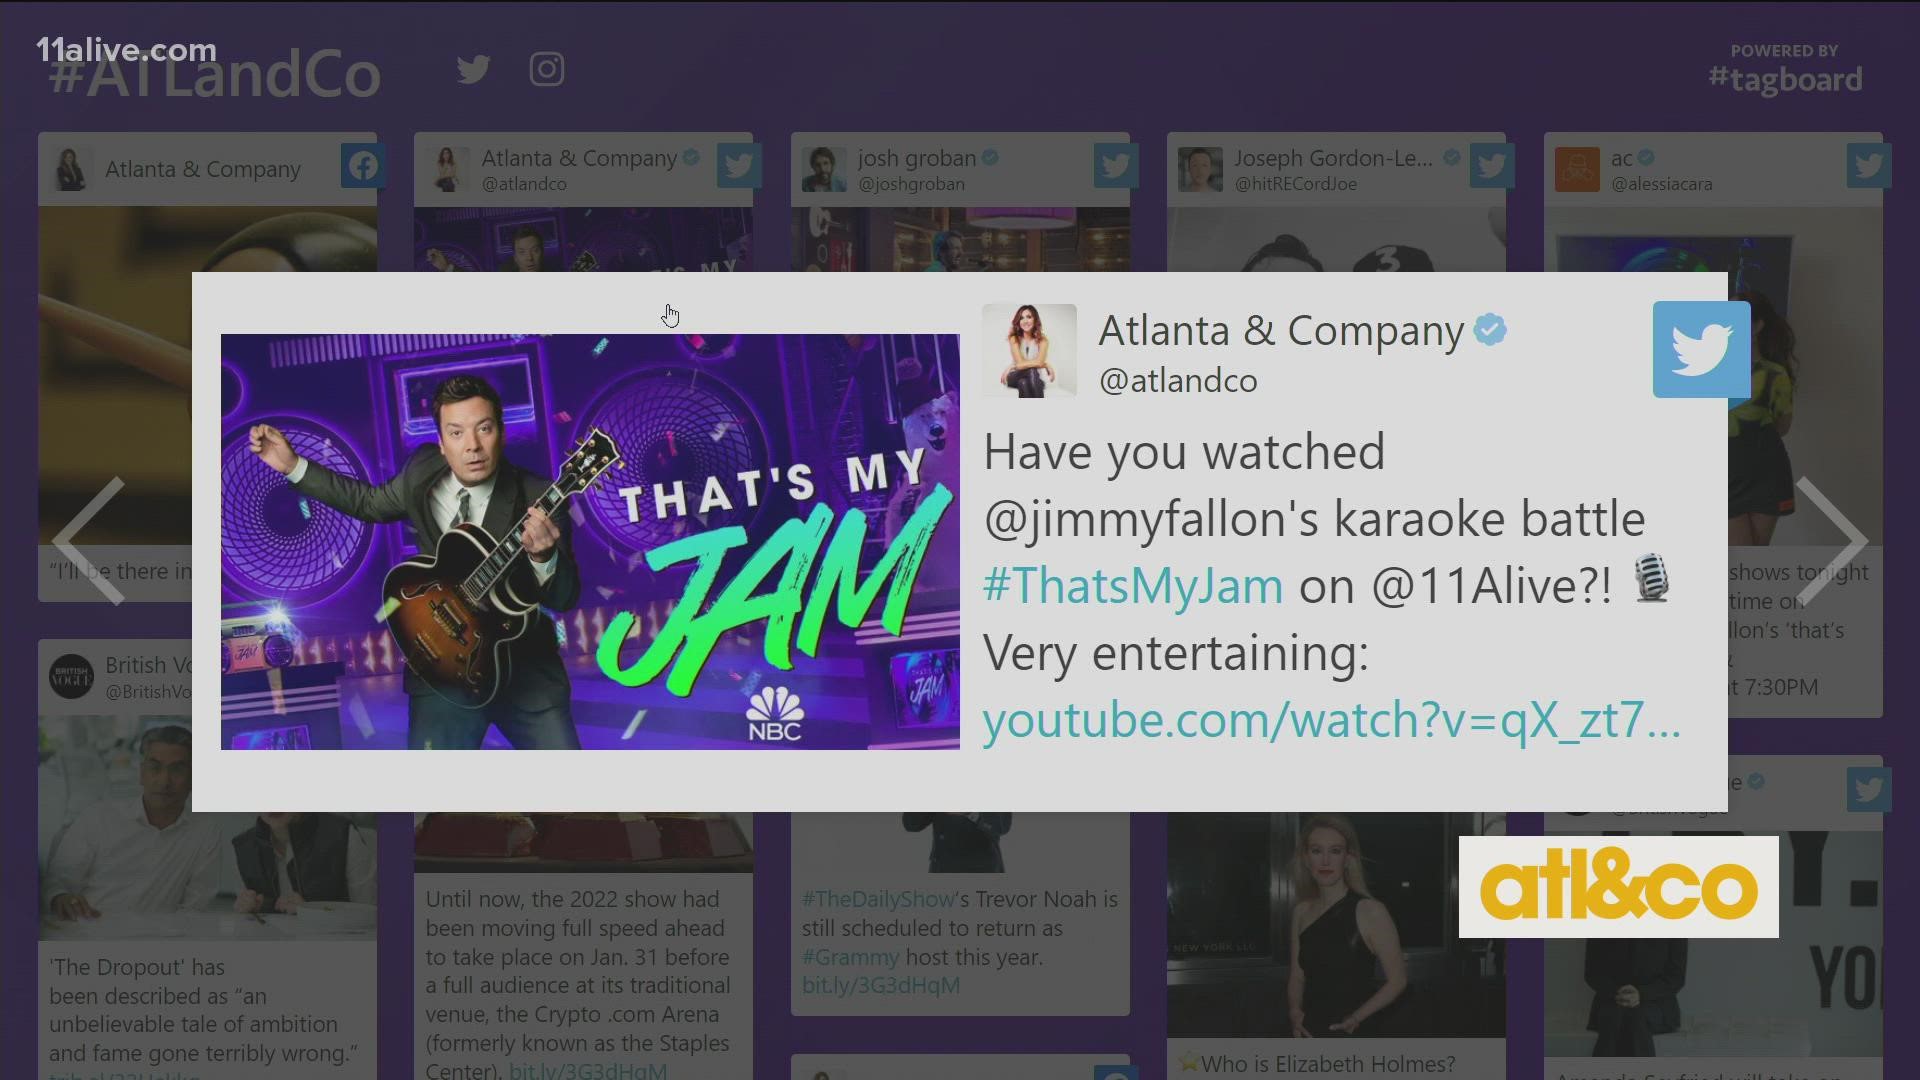 It's a karaoke-fueled, star-studded competition show on 11Alive! Are you watching Jimmy Fallon host 'That's My Jam' on NBC?